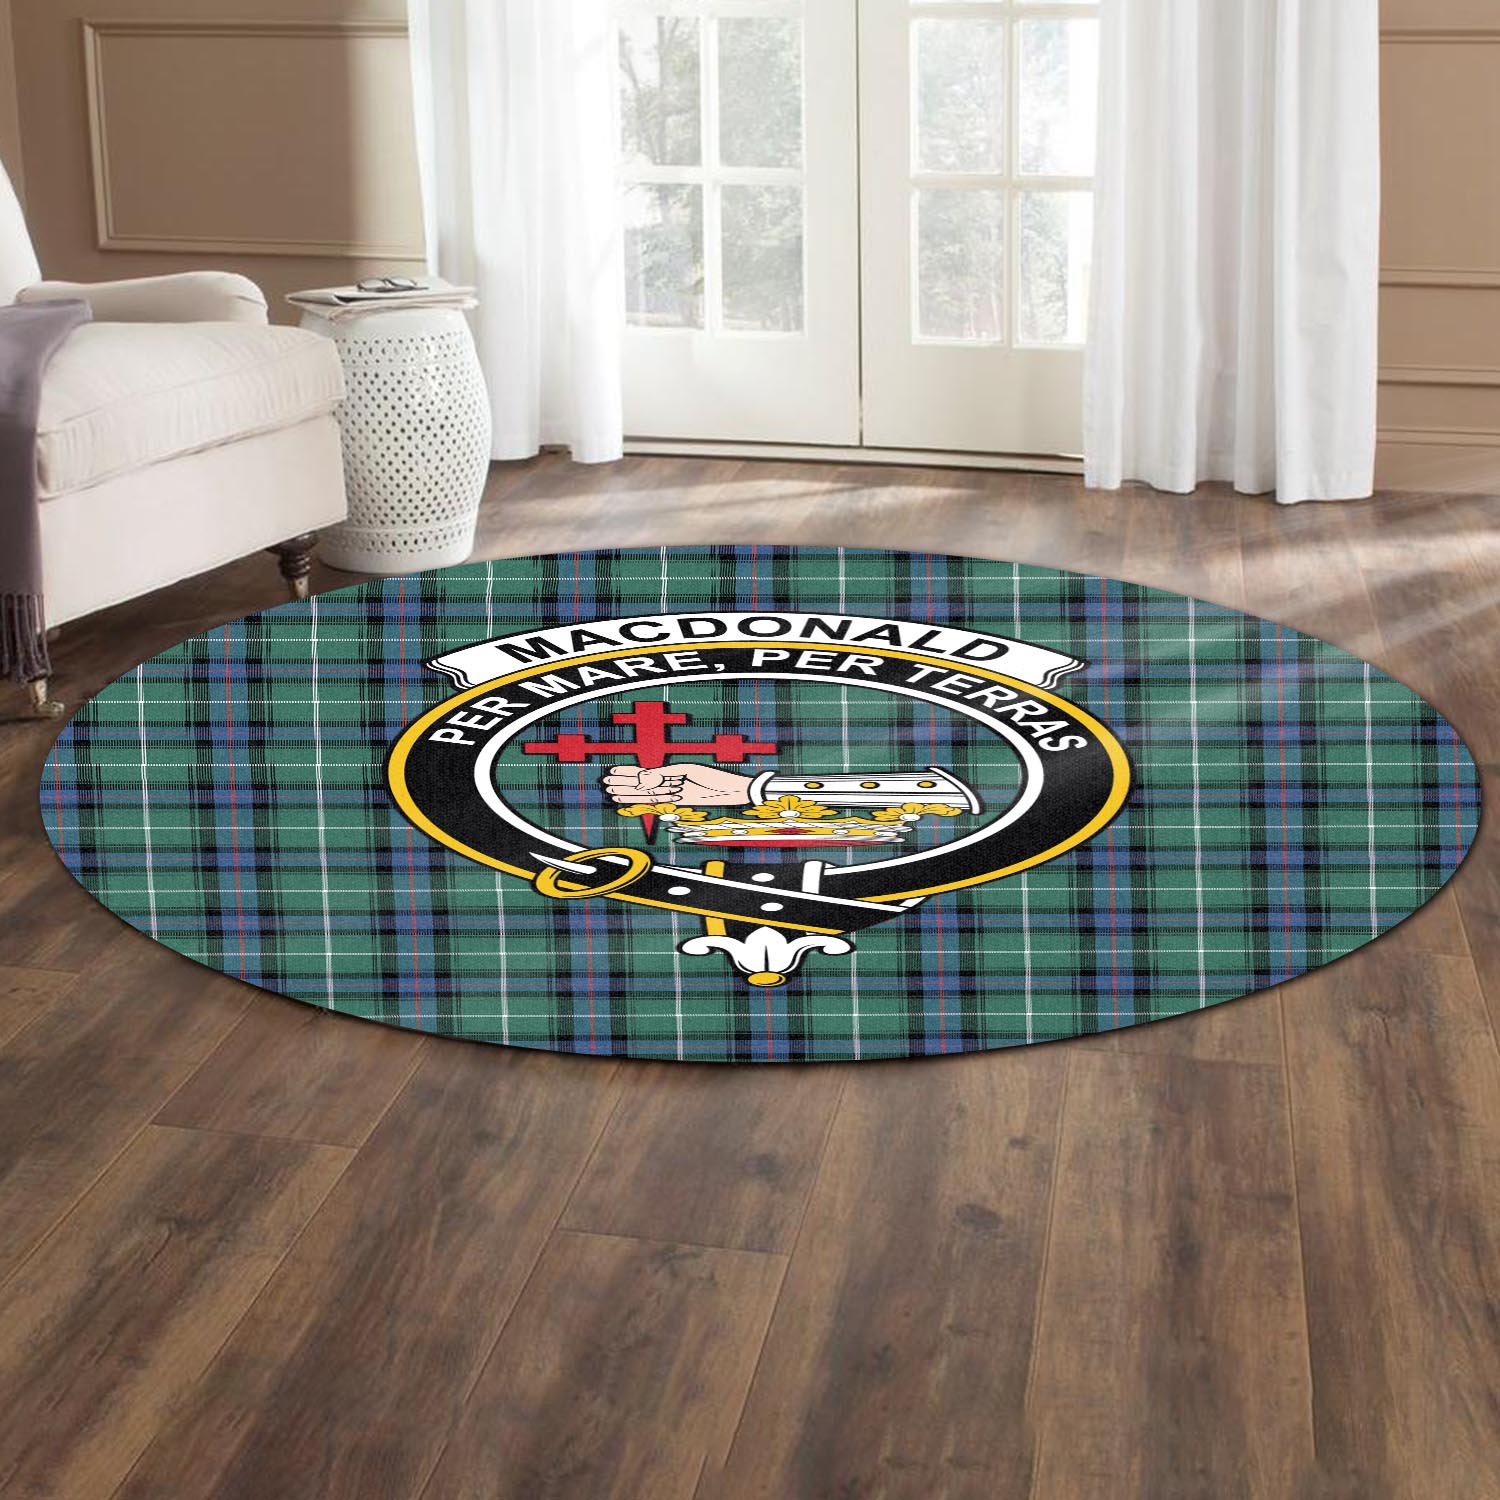 macdonald-of-the-isles-hunting-ancient-tartan-round-rug-with-family-crest